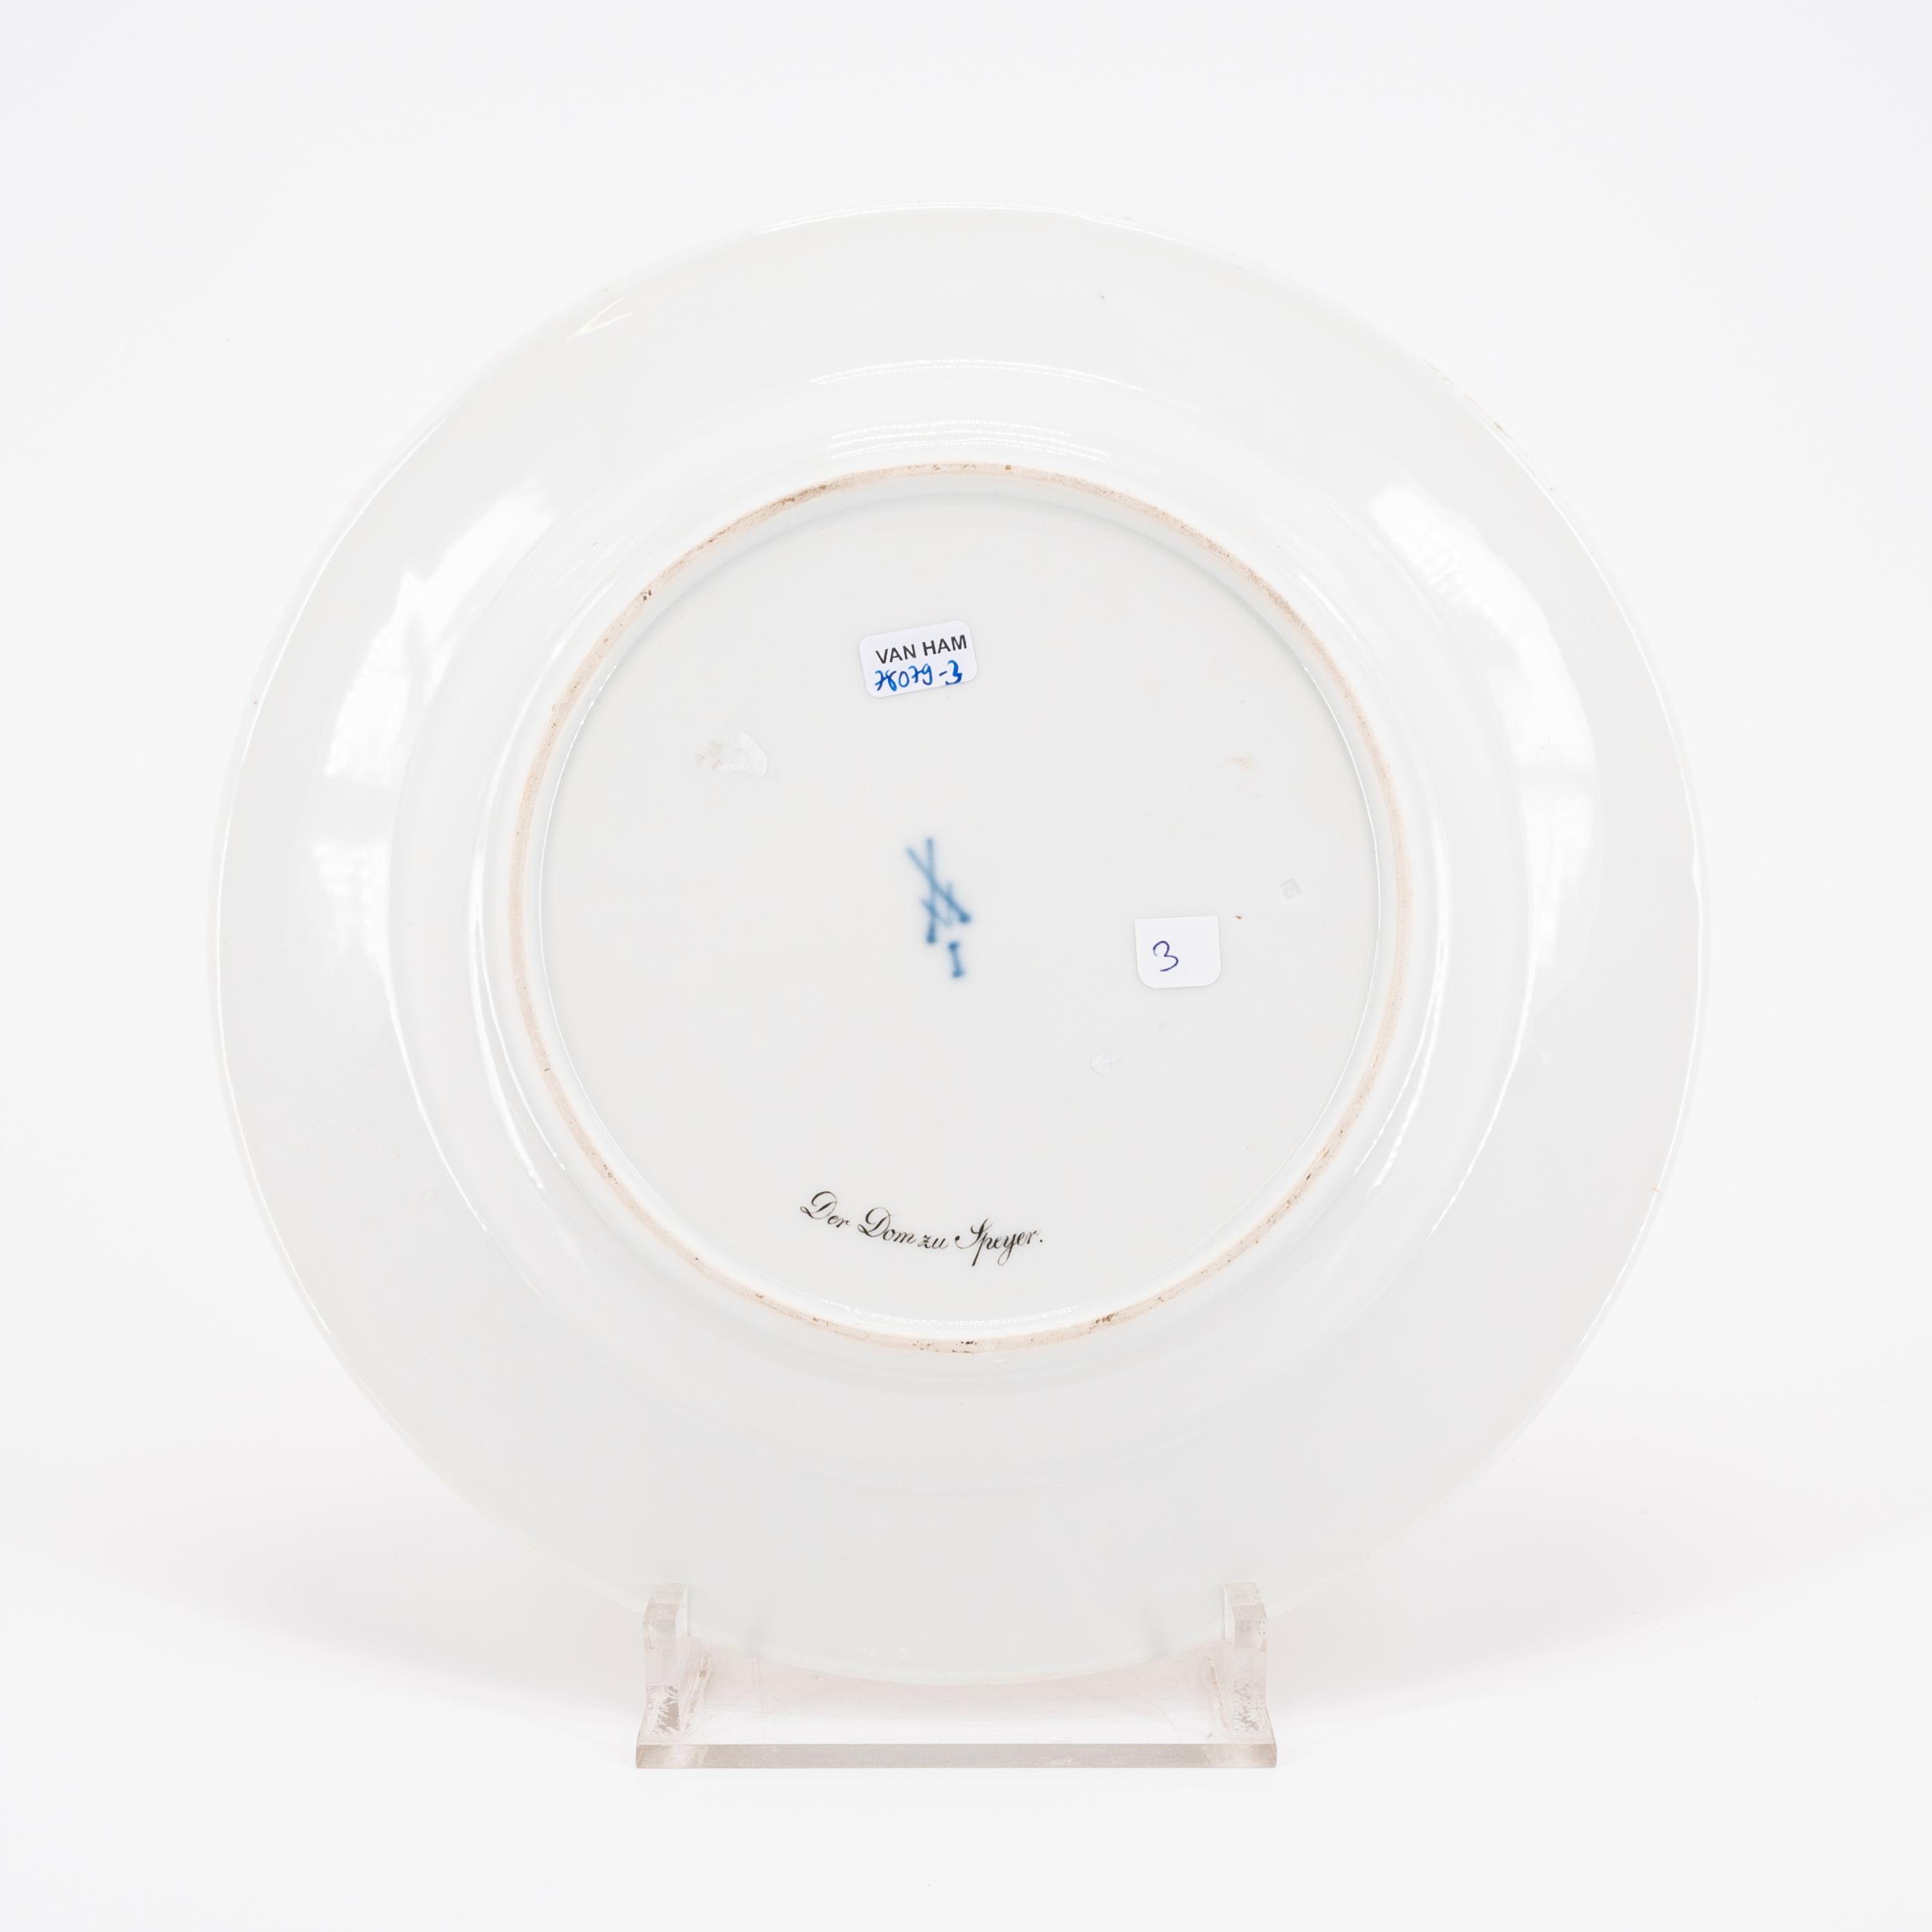 PORCELAIN PLATE WITH THE 'DOM ZU SPEYER' (SPEYER CATHEDRAL) - Image 2 of 2